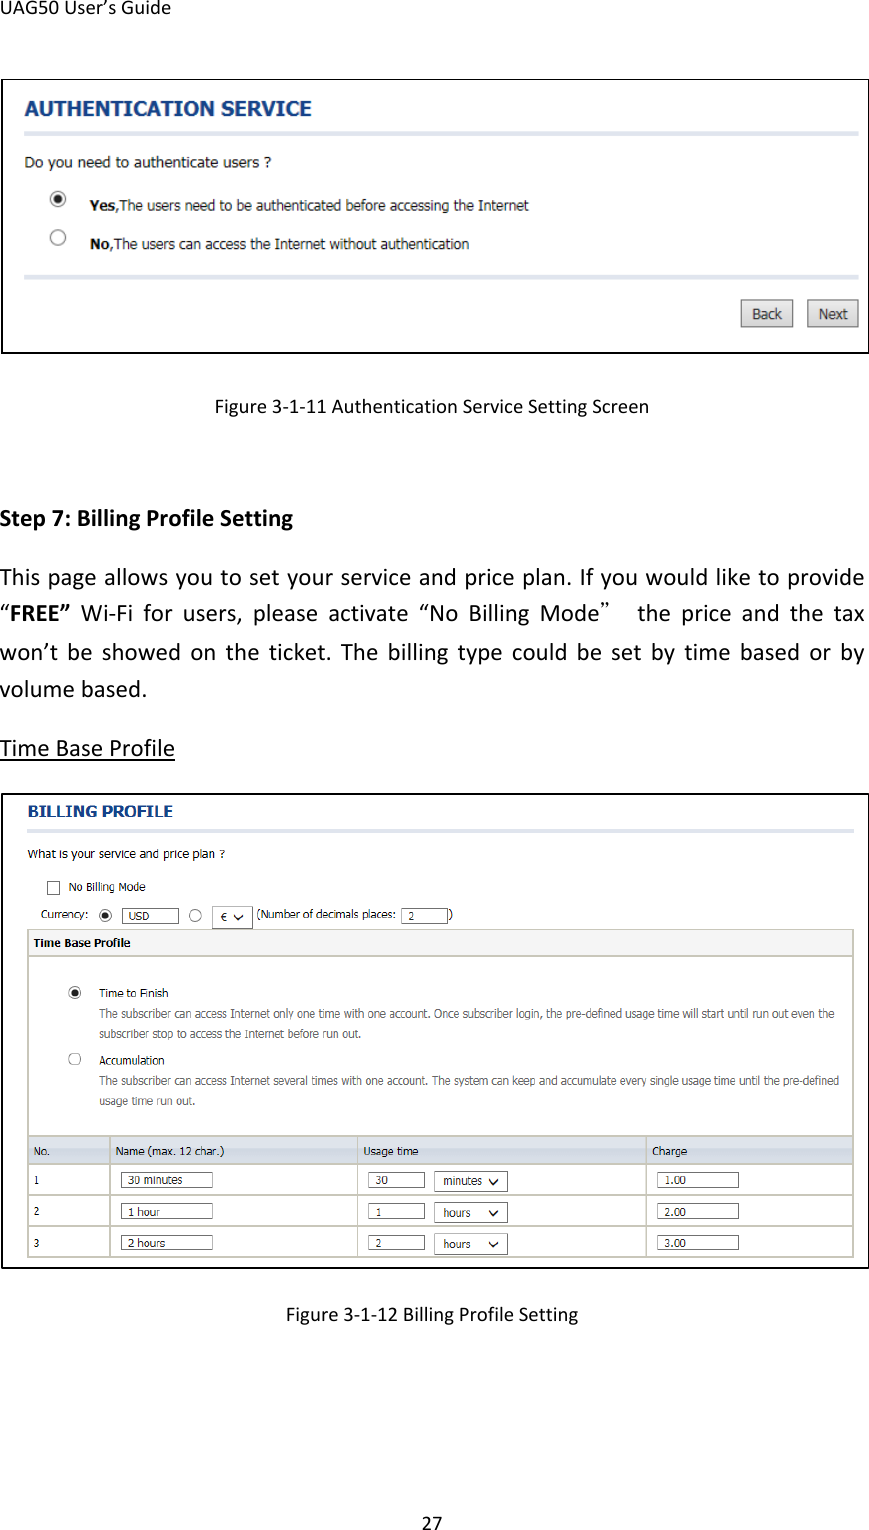 UAG50 User’s Guide 27  Figure 3-1-11 Authentication Service Setting Screen  Step 7: Billing Profile Setting This page allows you to set your service and price plan. If you would like to provide “FREE”  Wi-Fi for users, please activate “No Billing Mode” the price and the tax won’t be showed on the ticket. The billing type could be set by time based  or by volume based. Time Base Profile  Figure 3-1-12 Billing Profile Setting    